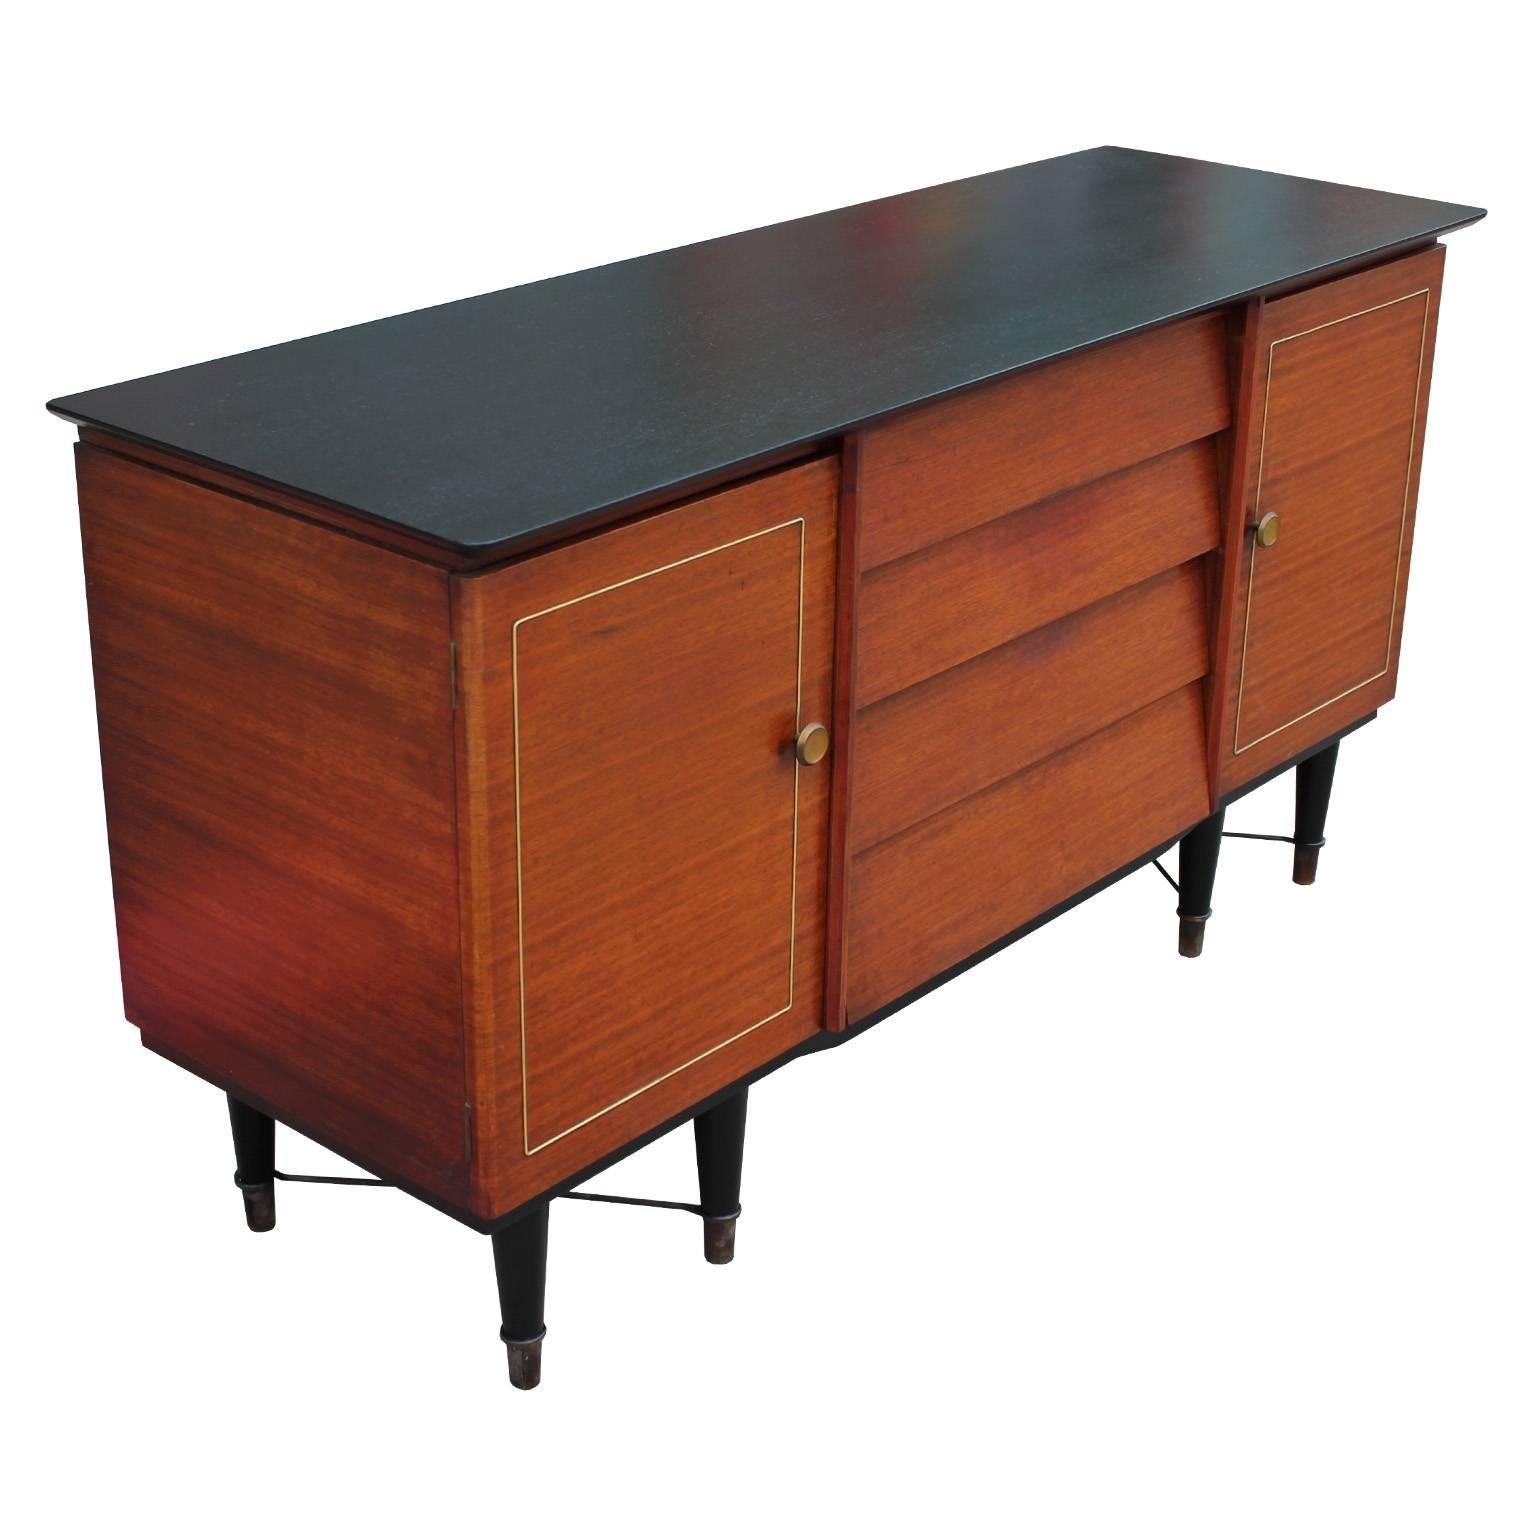 Elegant louvered sideboard, credenza or cabinet. Freshly finished in a medium teak with ebony accents. Brass accents complete the piece along with a stretched brass X-base. Two cabinets and four drawers provide storage. Stunning from all angles.